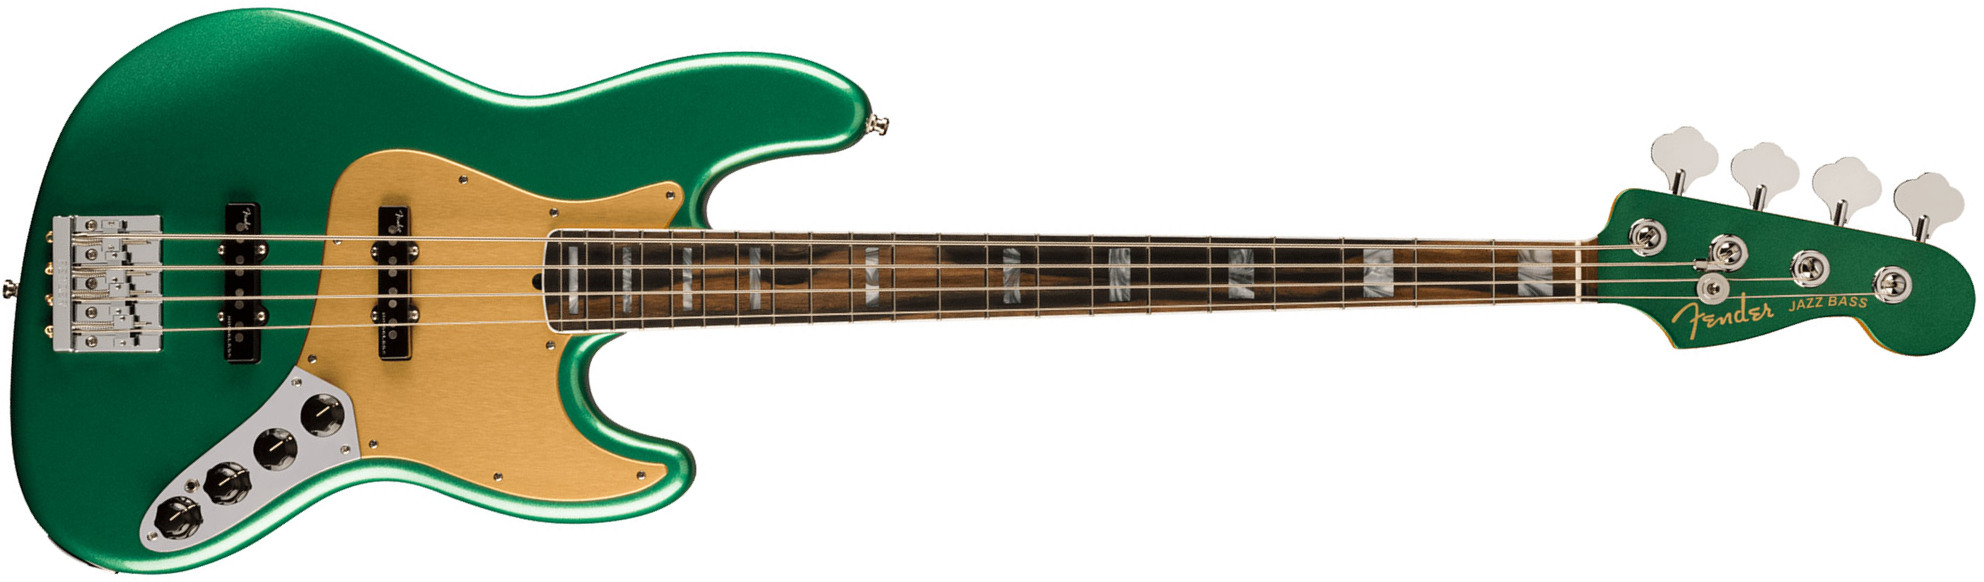 Fender Jazz Bass American Ultra Ltd Usa Active Eb - Mystic Pine Green - Solid body electric bass - Main picture